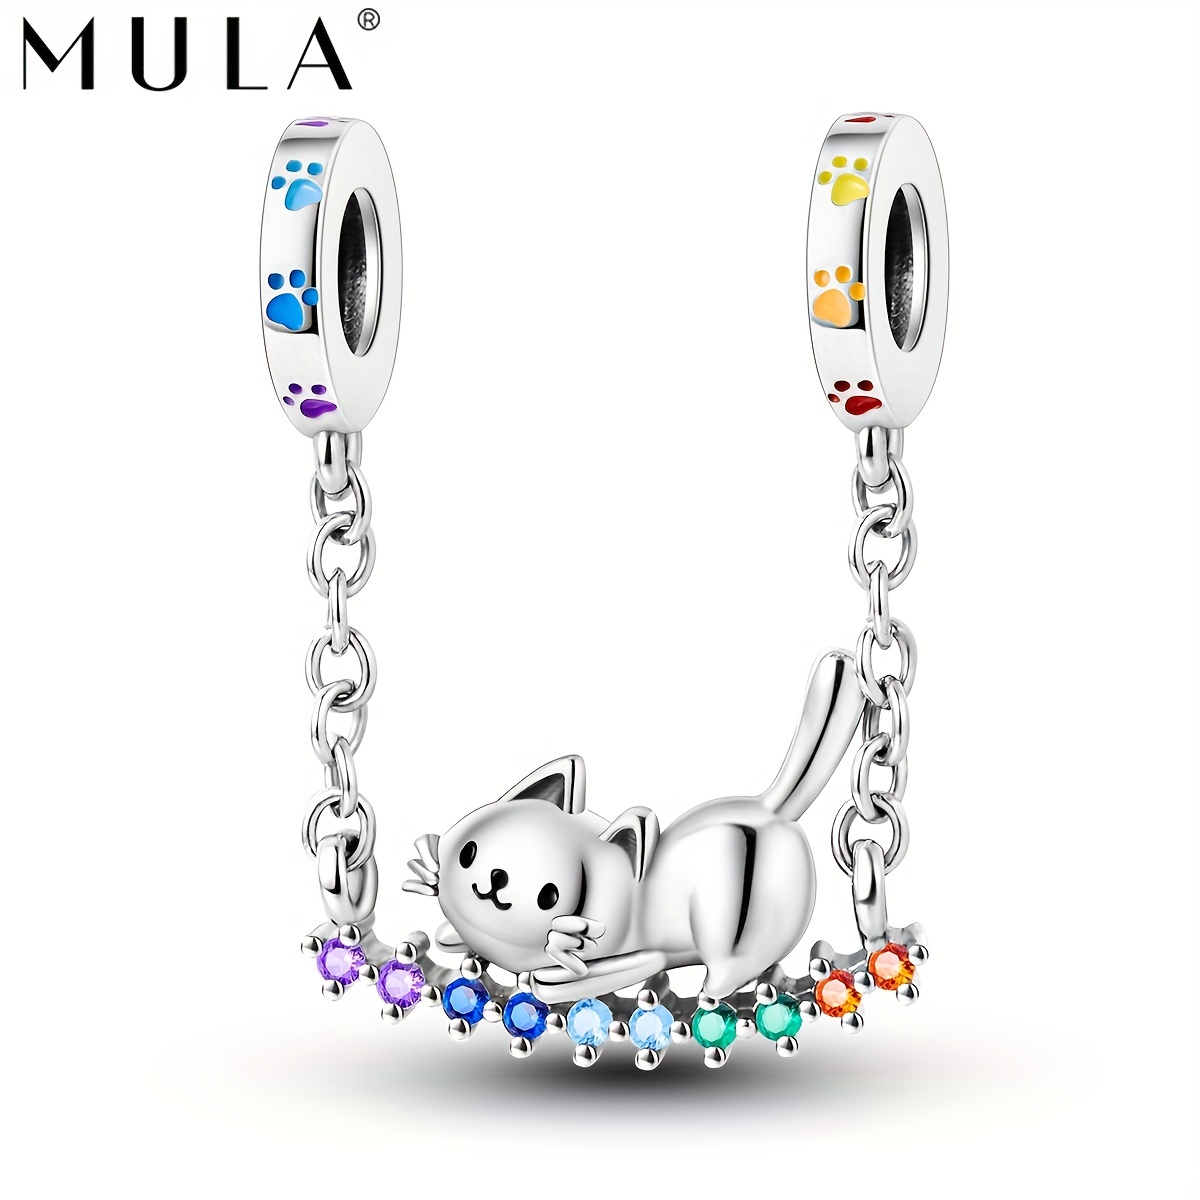 

1pc Mula 925 Silver Plated Lovely Cat Rainbow Swing Pendant Charm Fit Original Bracelet Necklace Beads For Diy Jewelry Making Gift For Women Friend